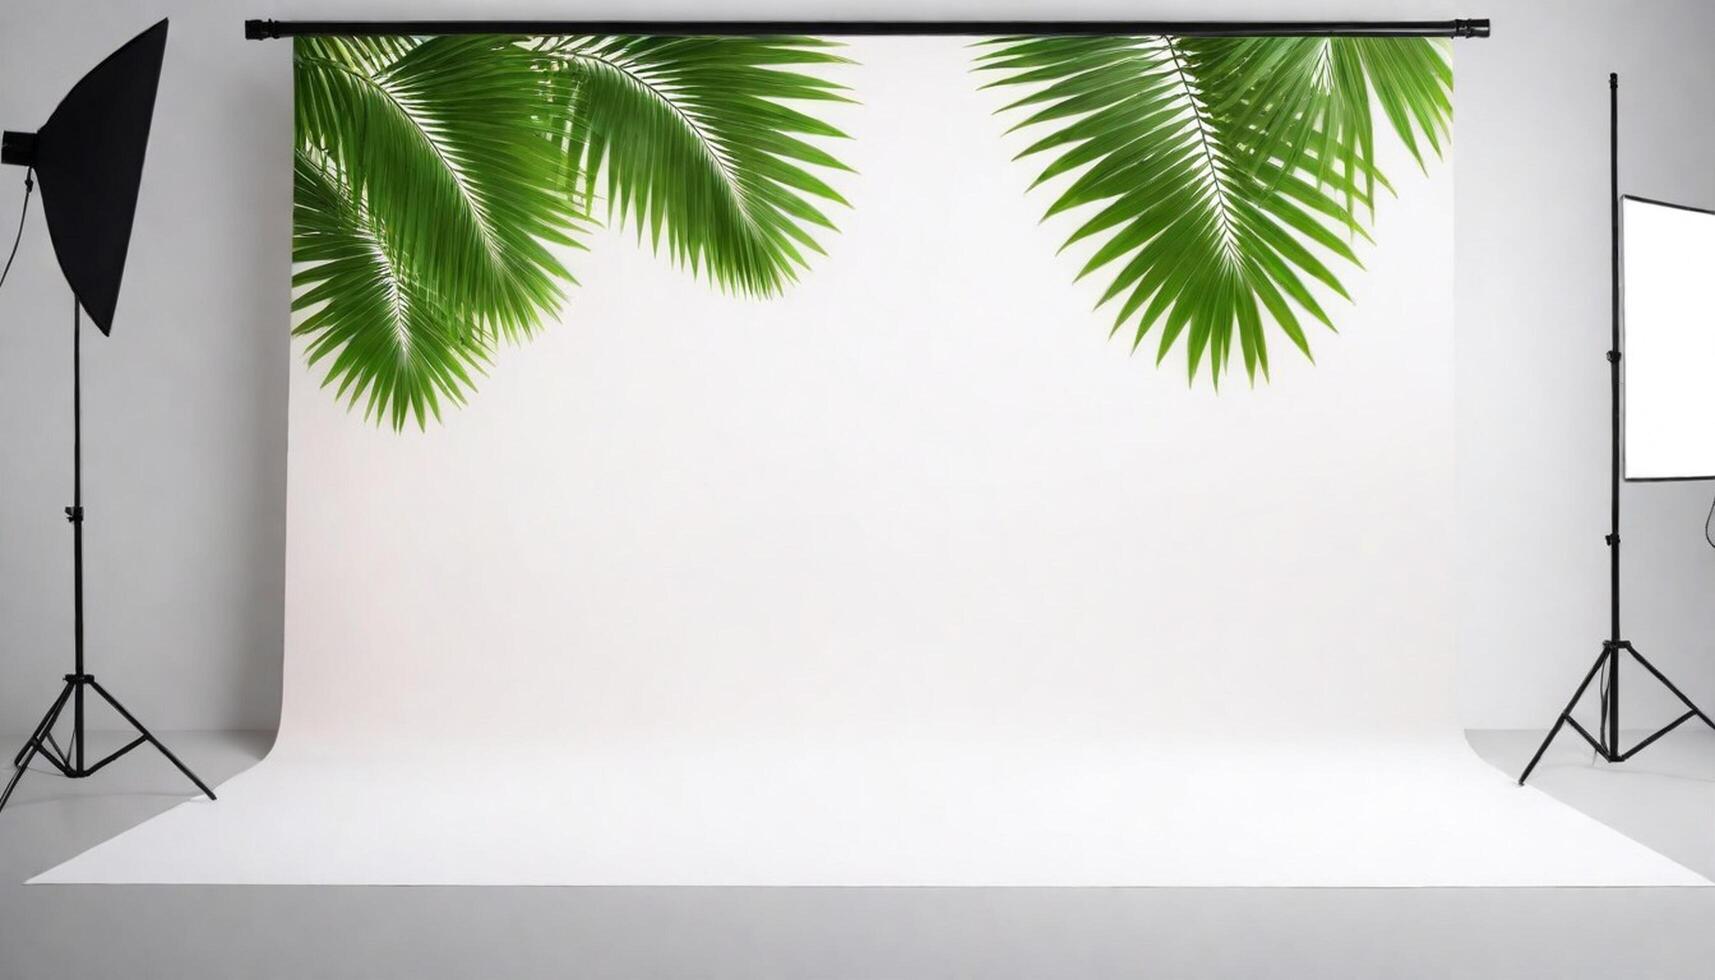 Aesthetic product backdrop, palm leaves photo